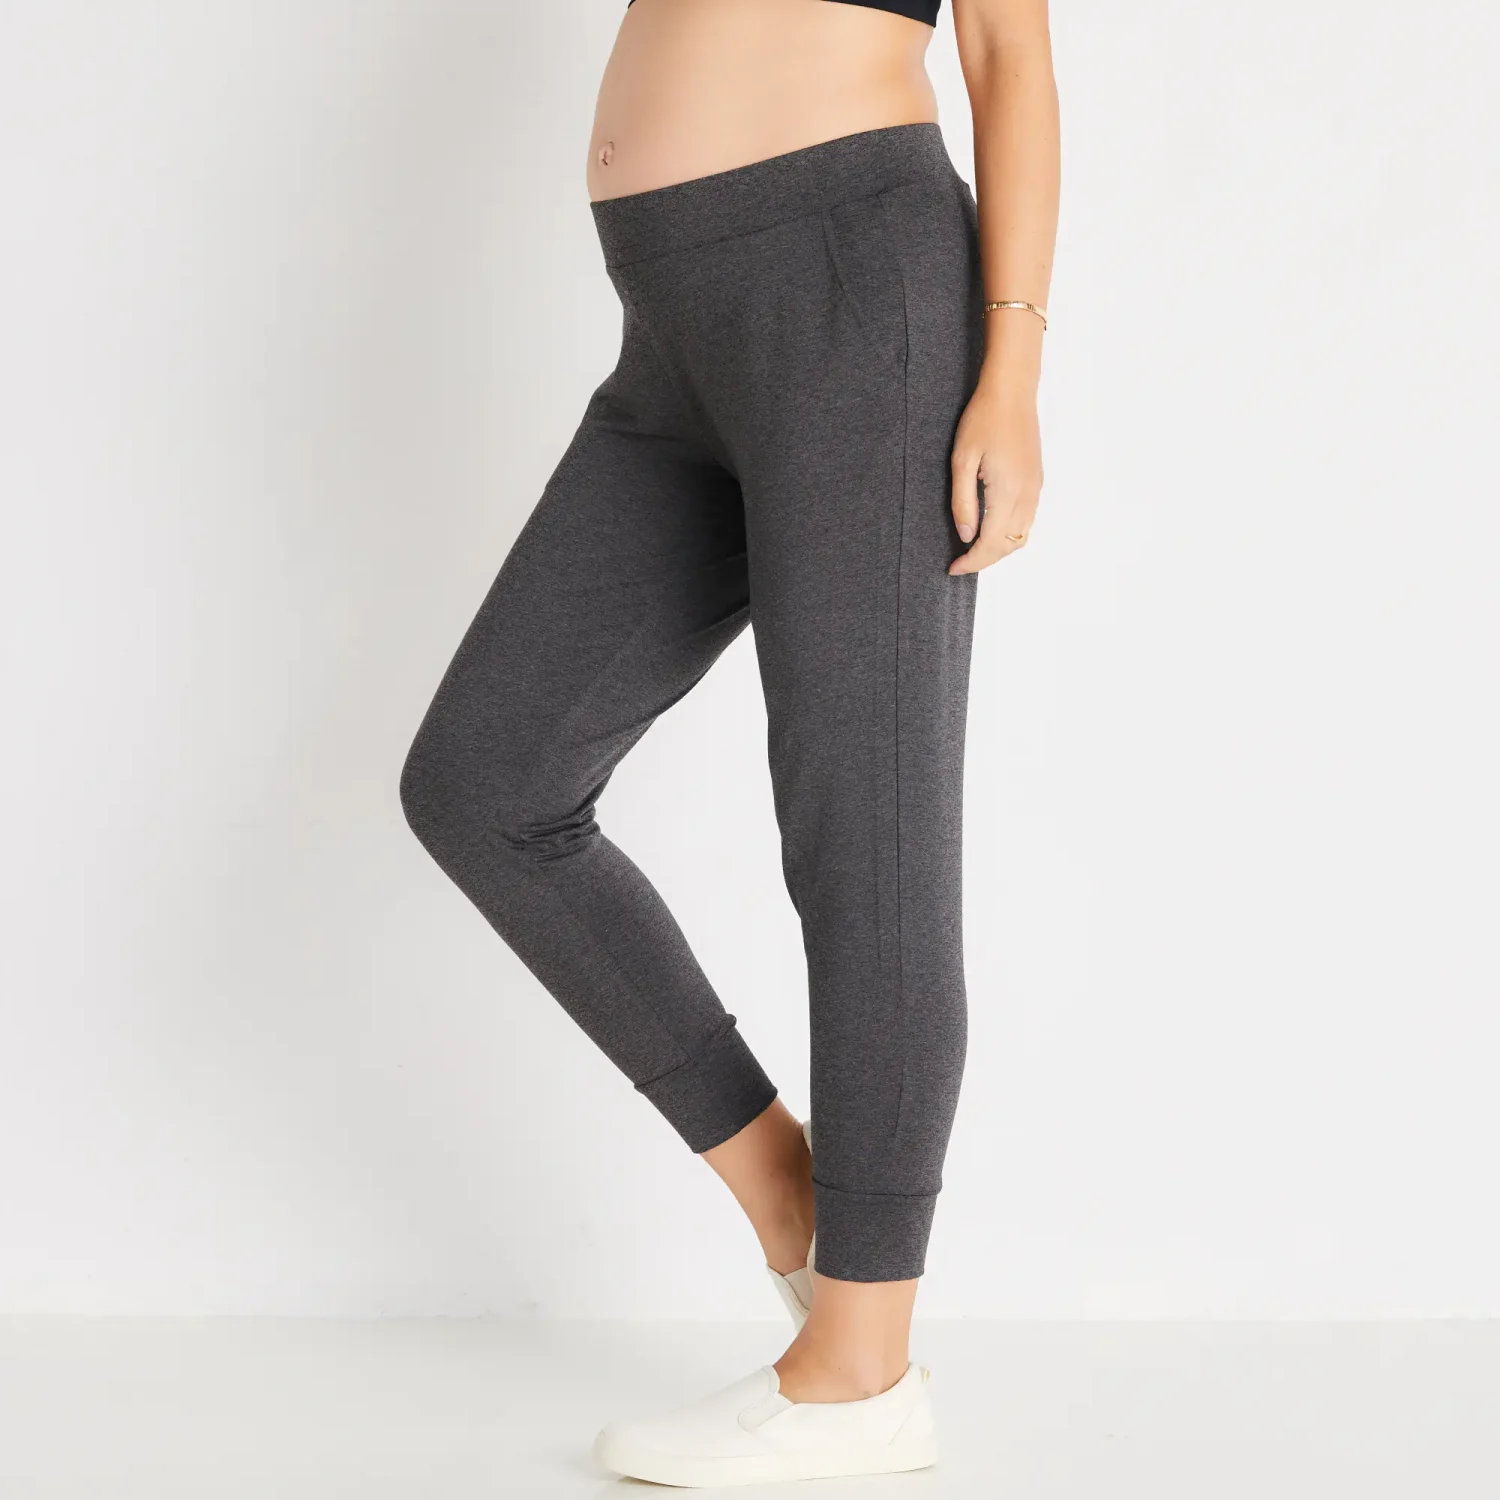 Hatch brand contemporary and stylish maternity friendly pants